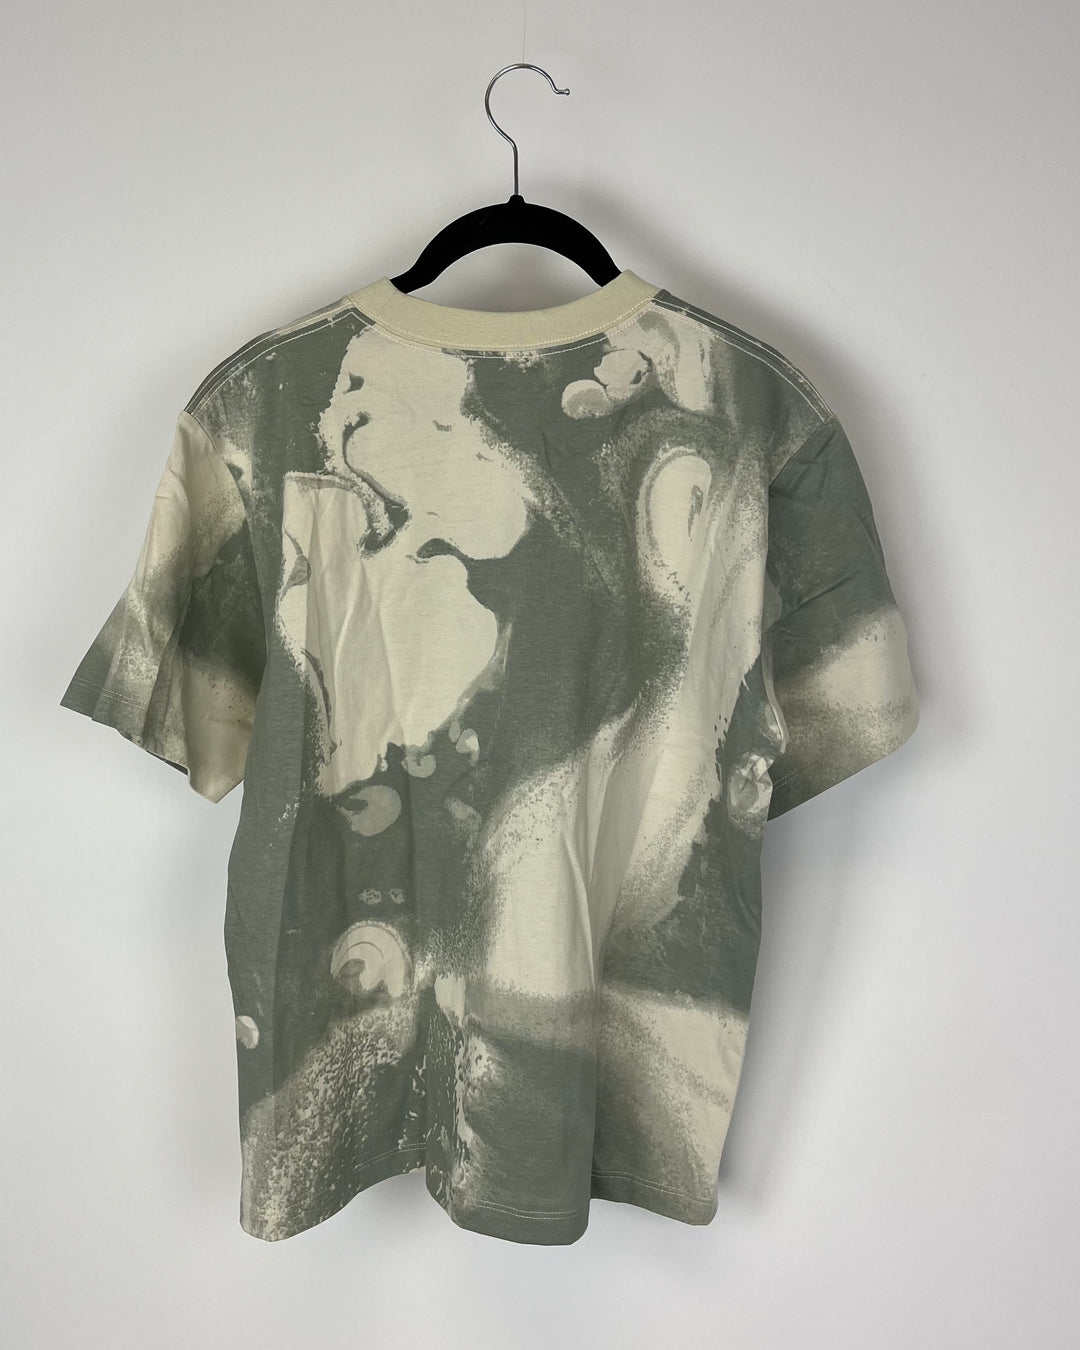 Sage Green and White Marble Print Top - Small